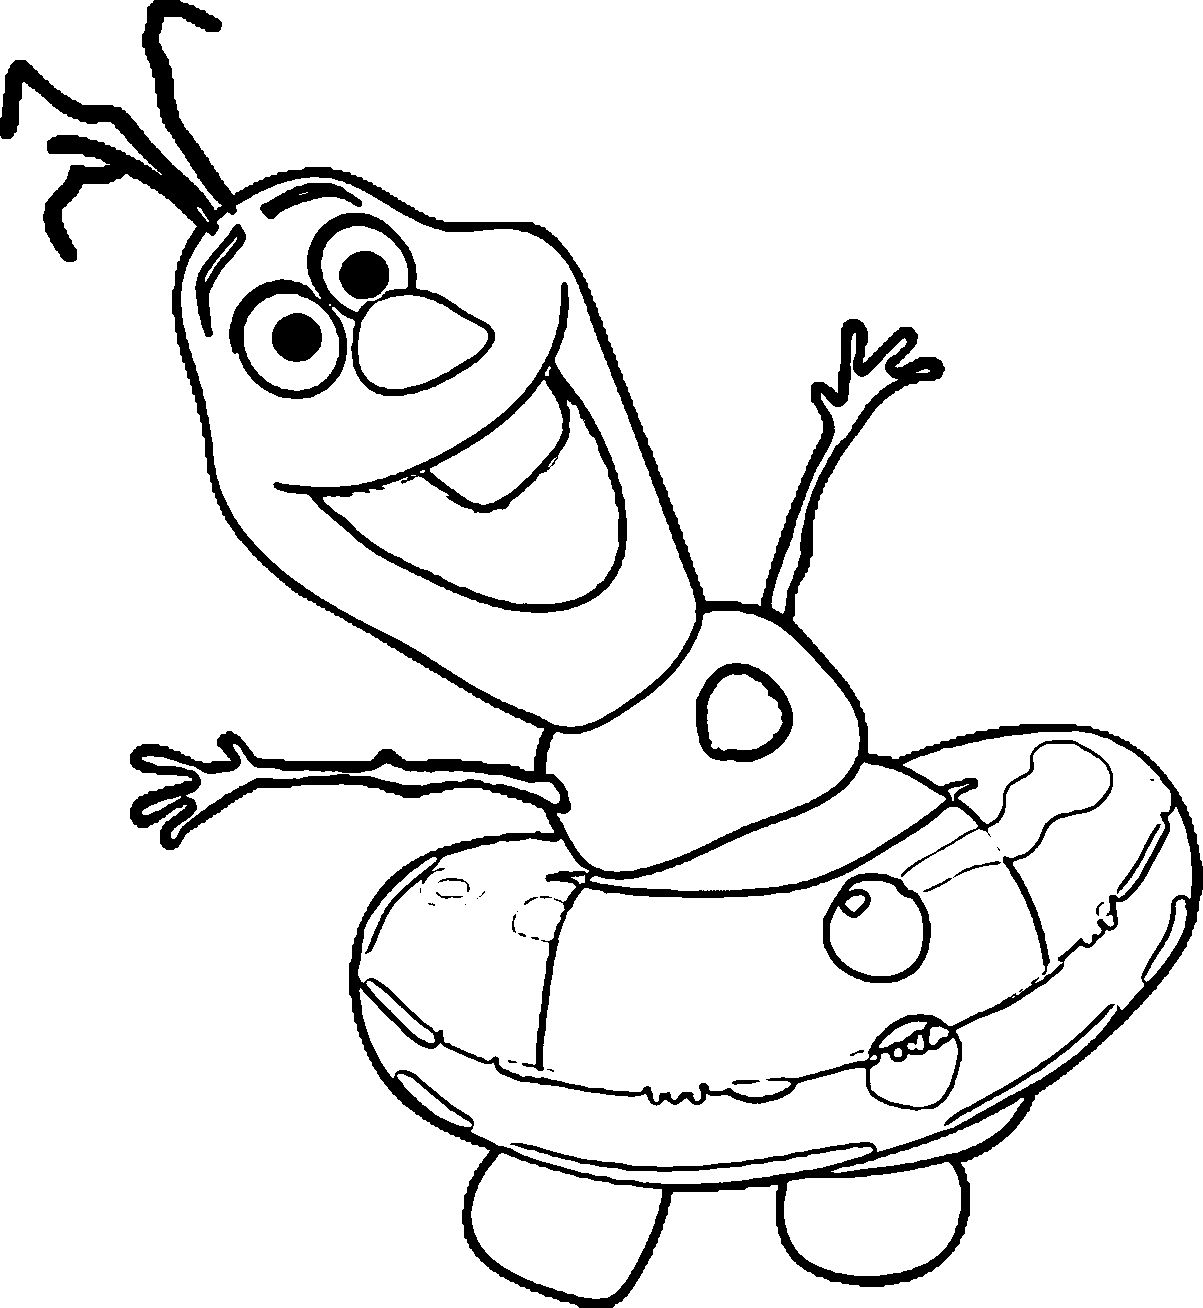 frozens-olaf-coloring-pages-best-coloring-pages-for-kids